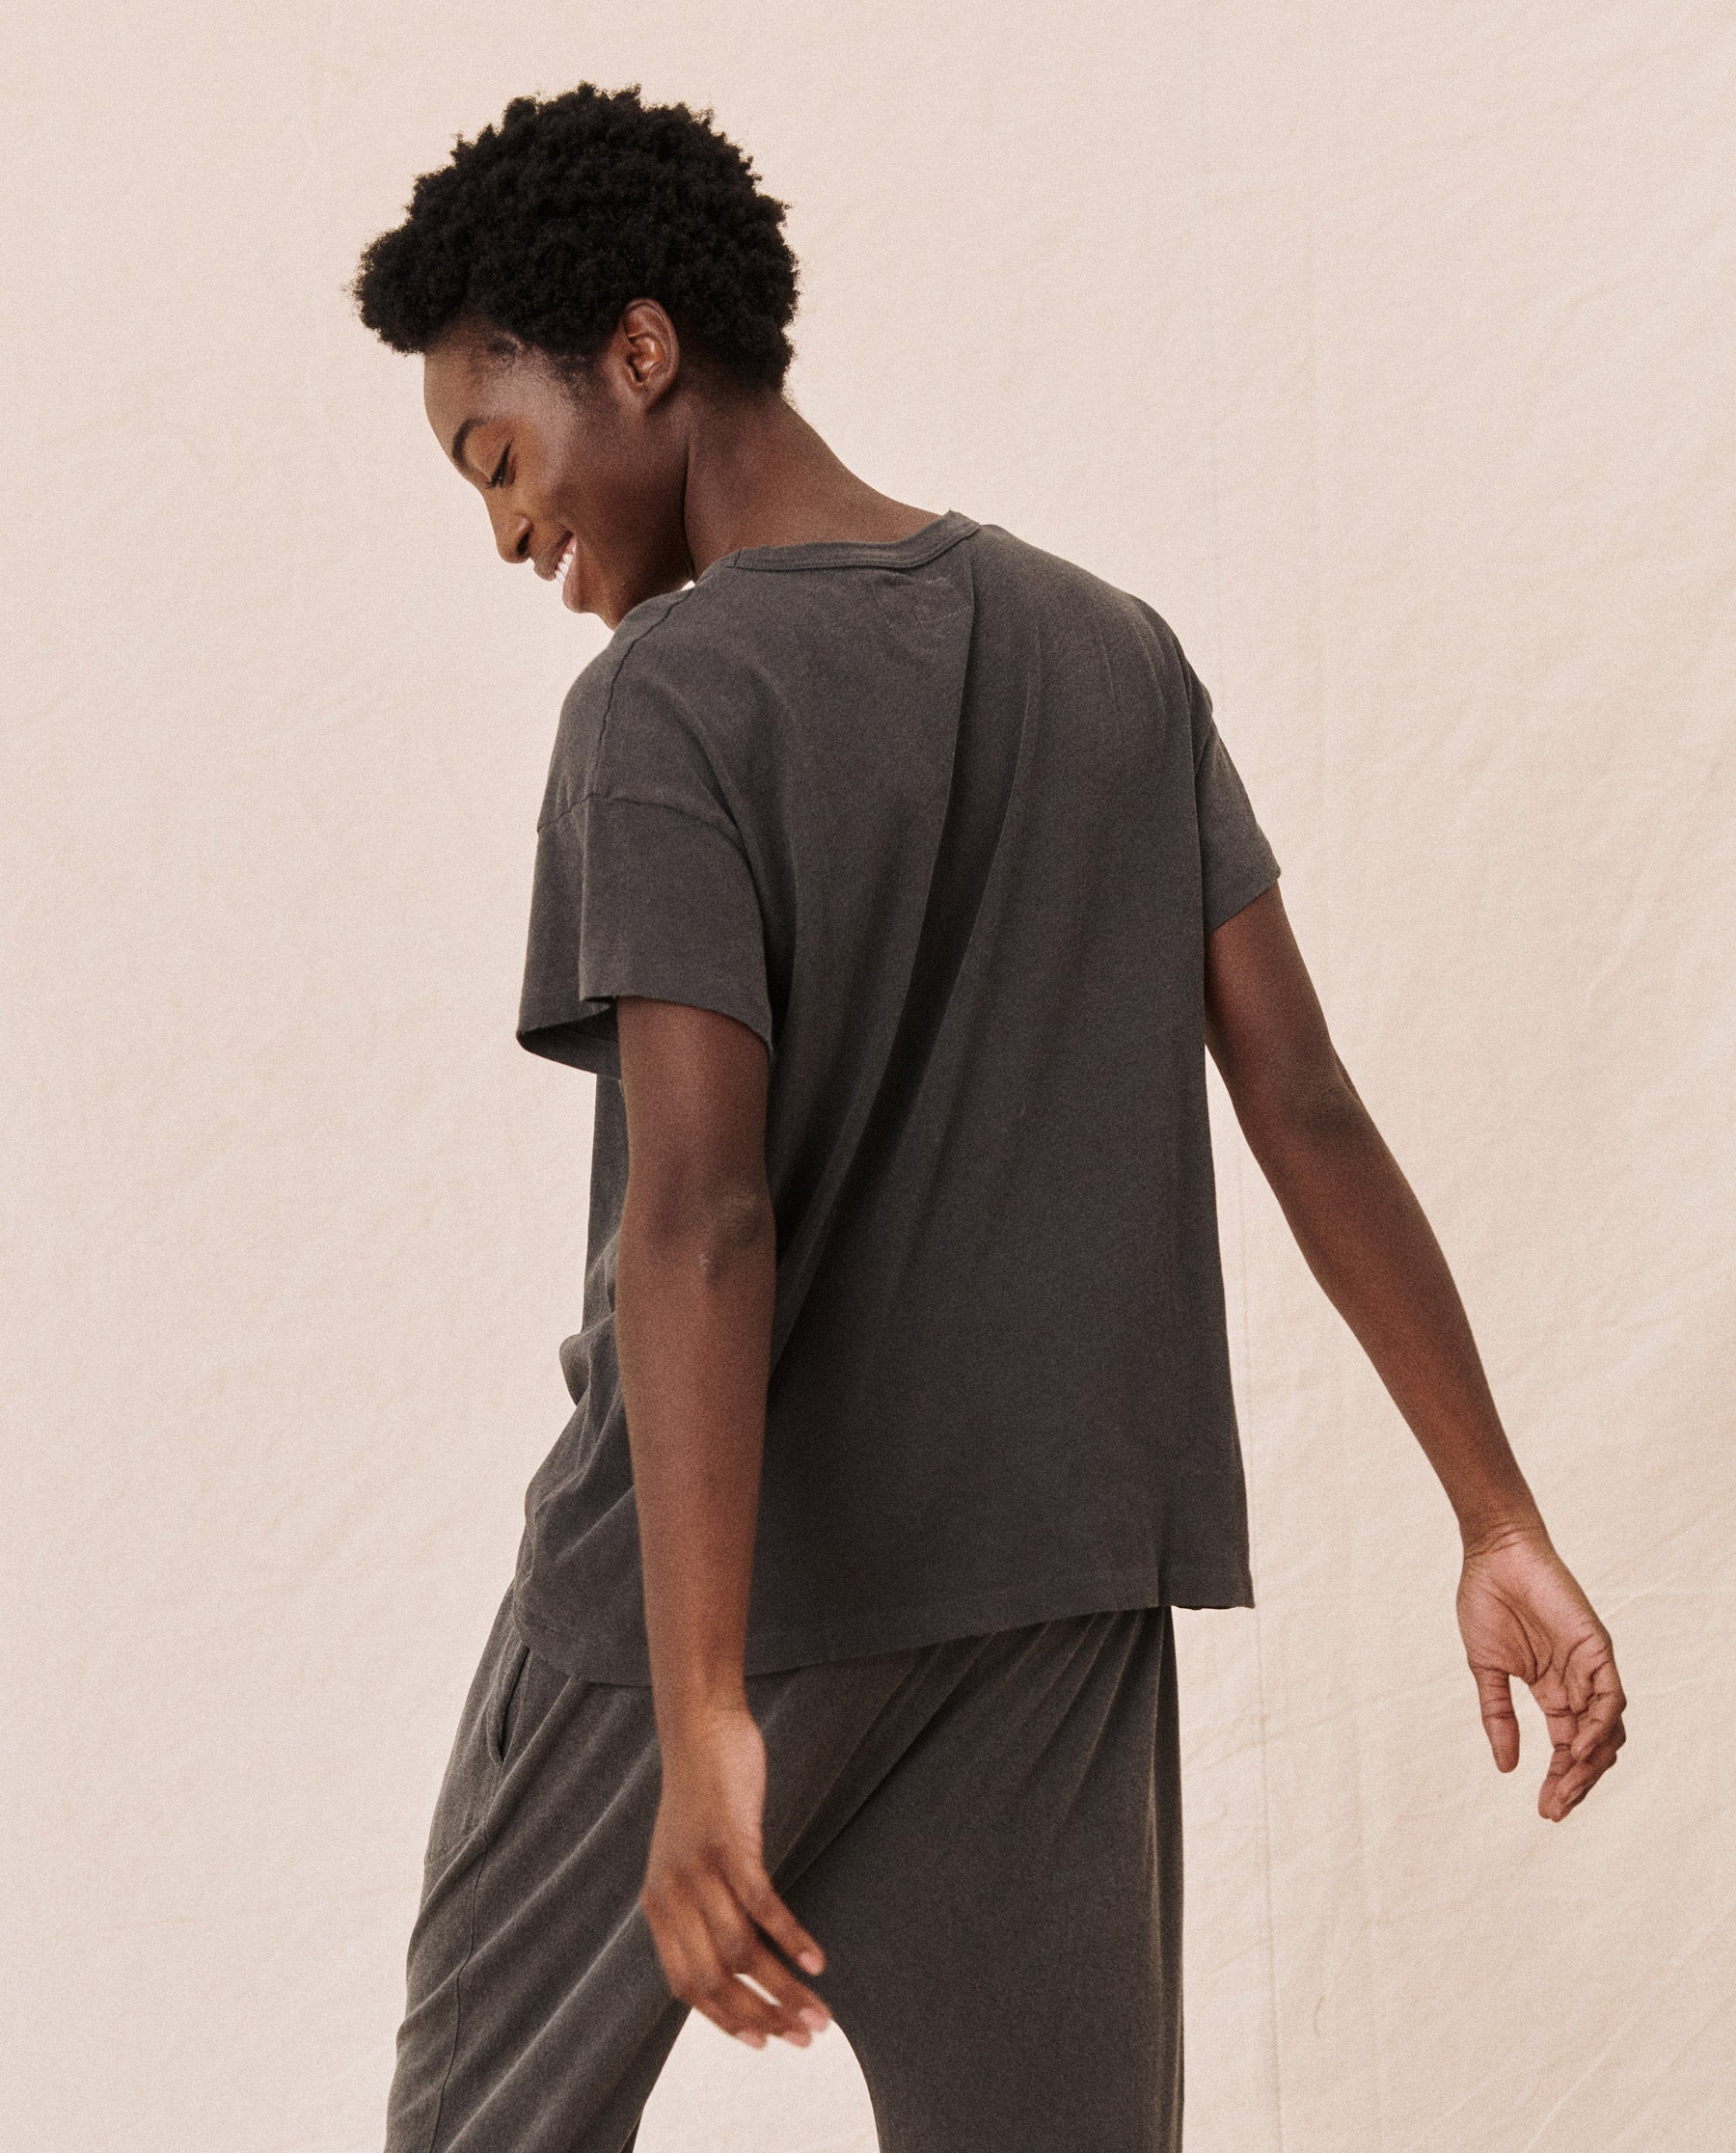 The Boxy Crew. Solid -- Washed Black TEES THE GREAT. CORE KNITS